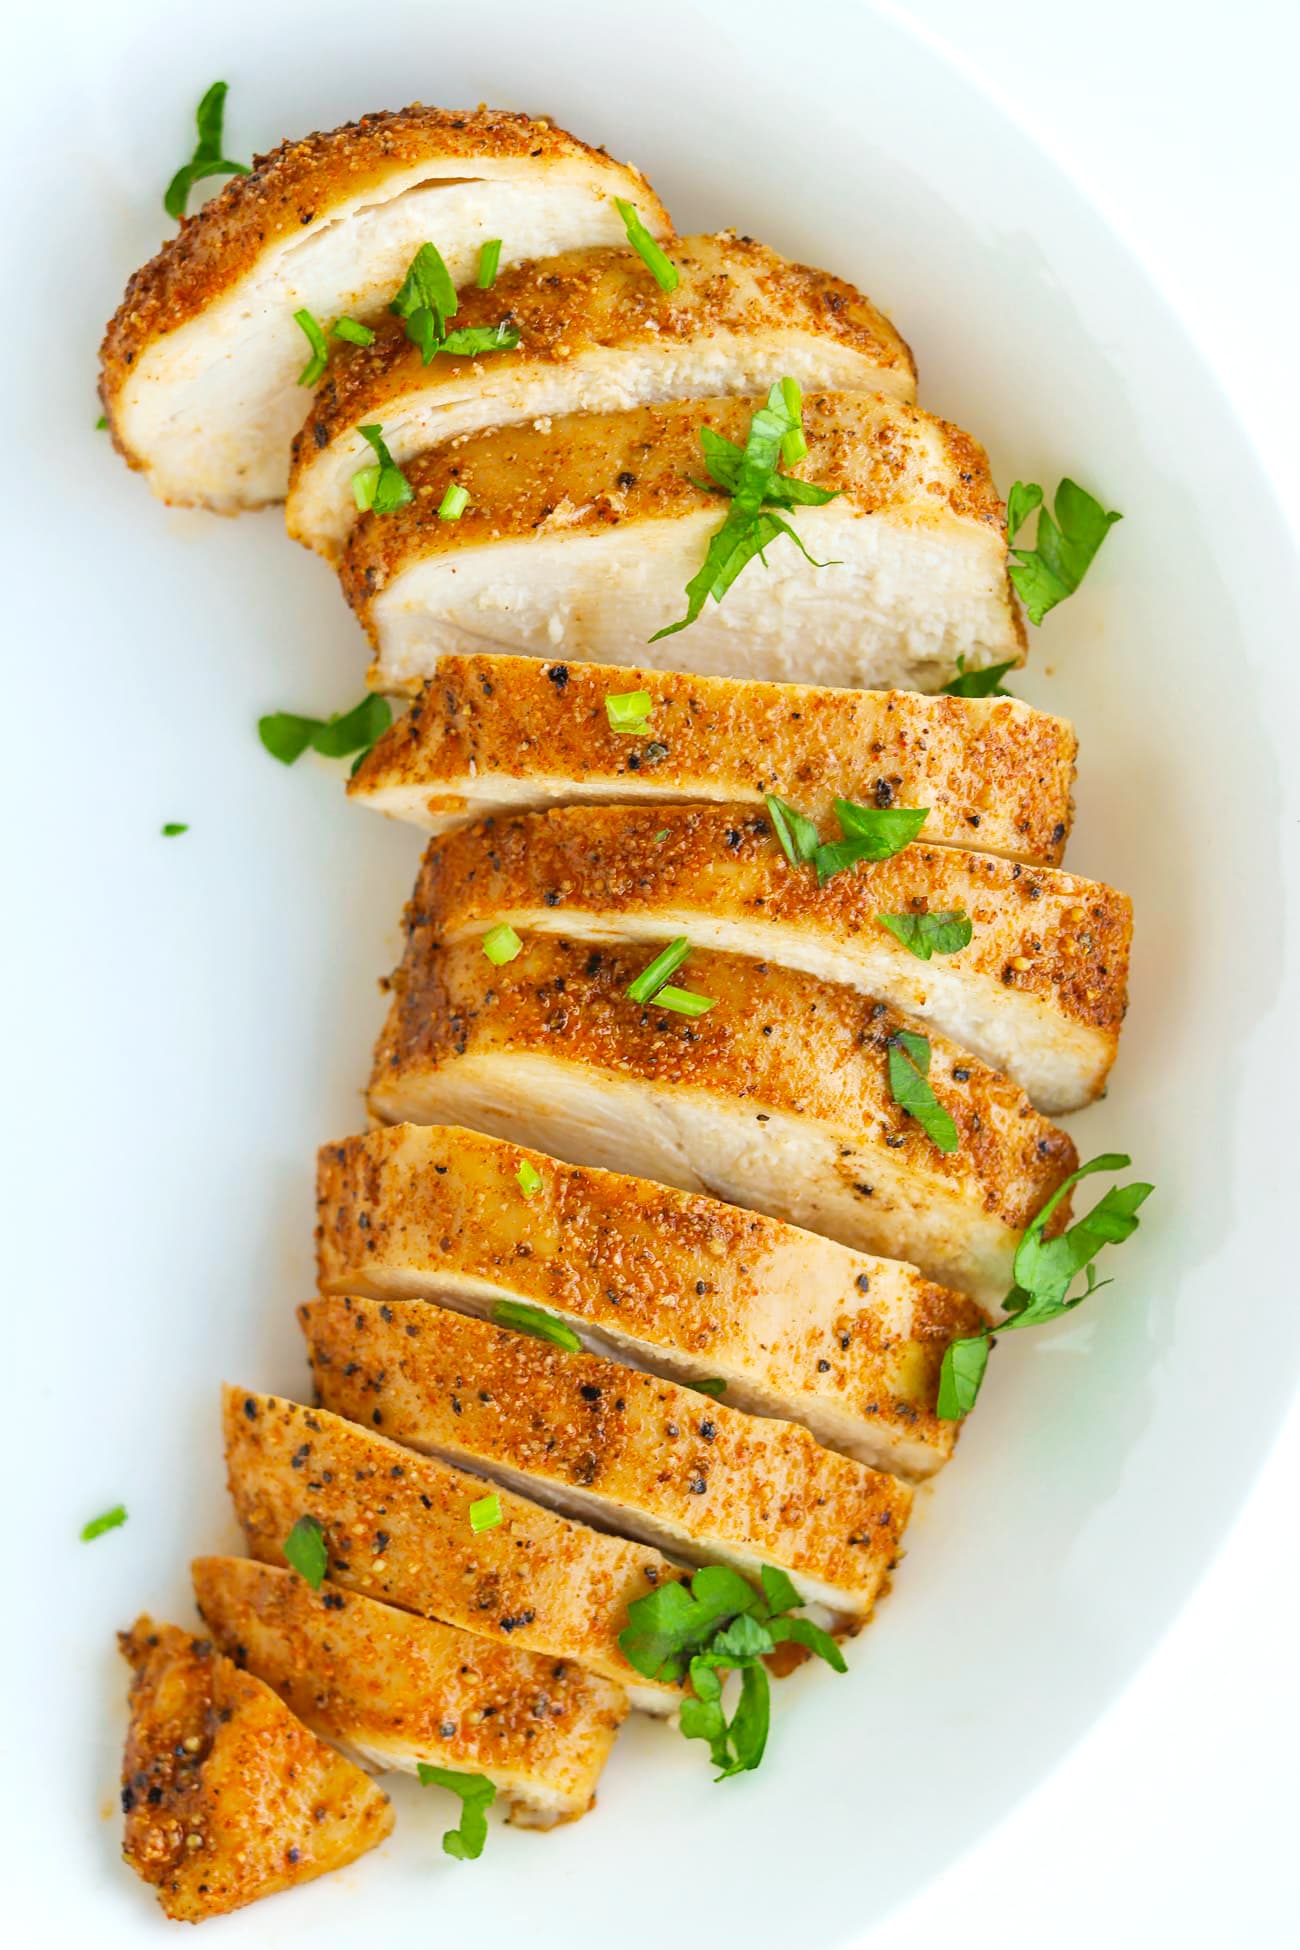 Juicy Baked Chicken Breasts Fanned Out On White Round Plate And Garnished With Chopped Parsley 